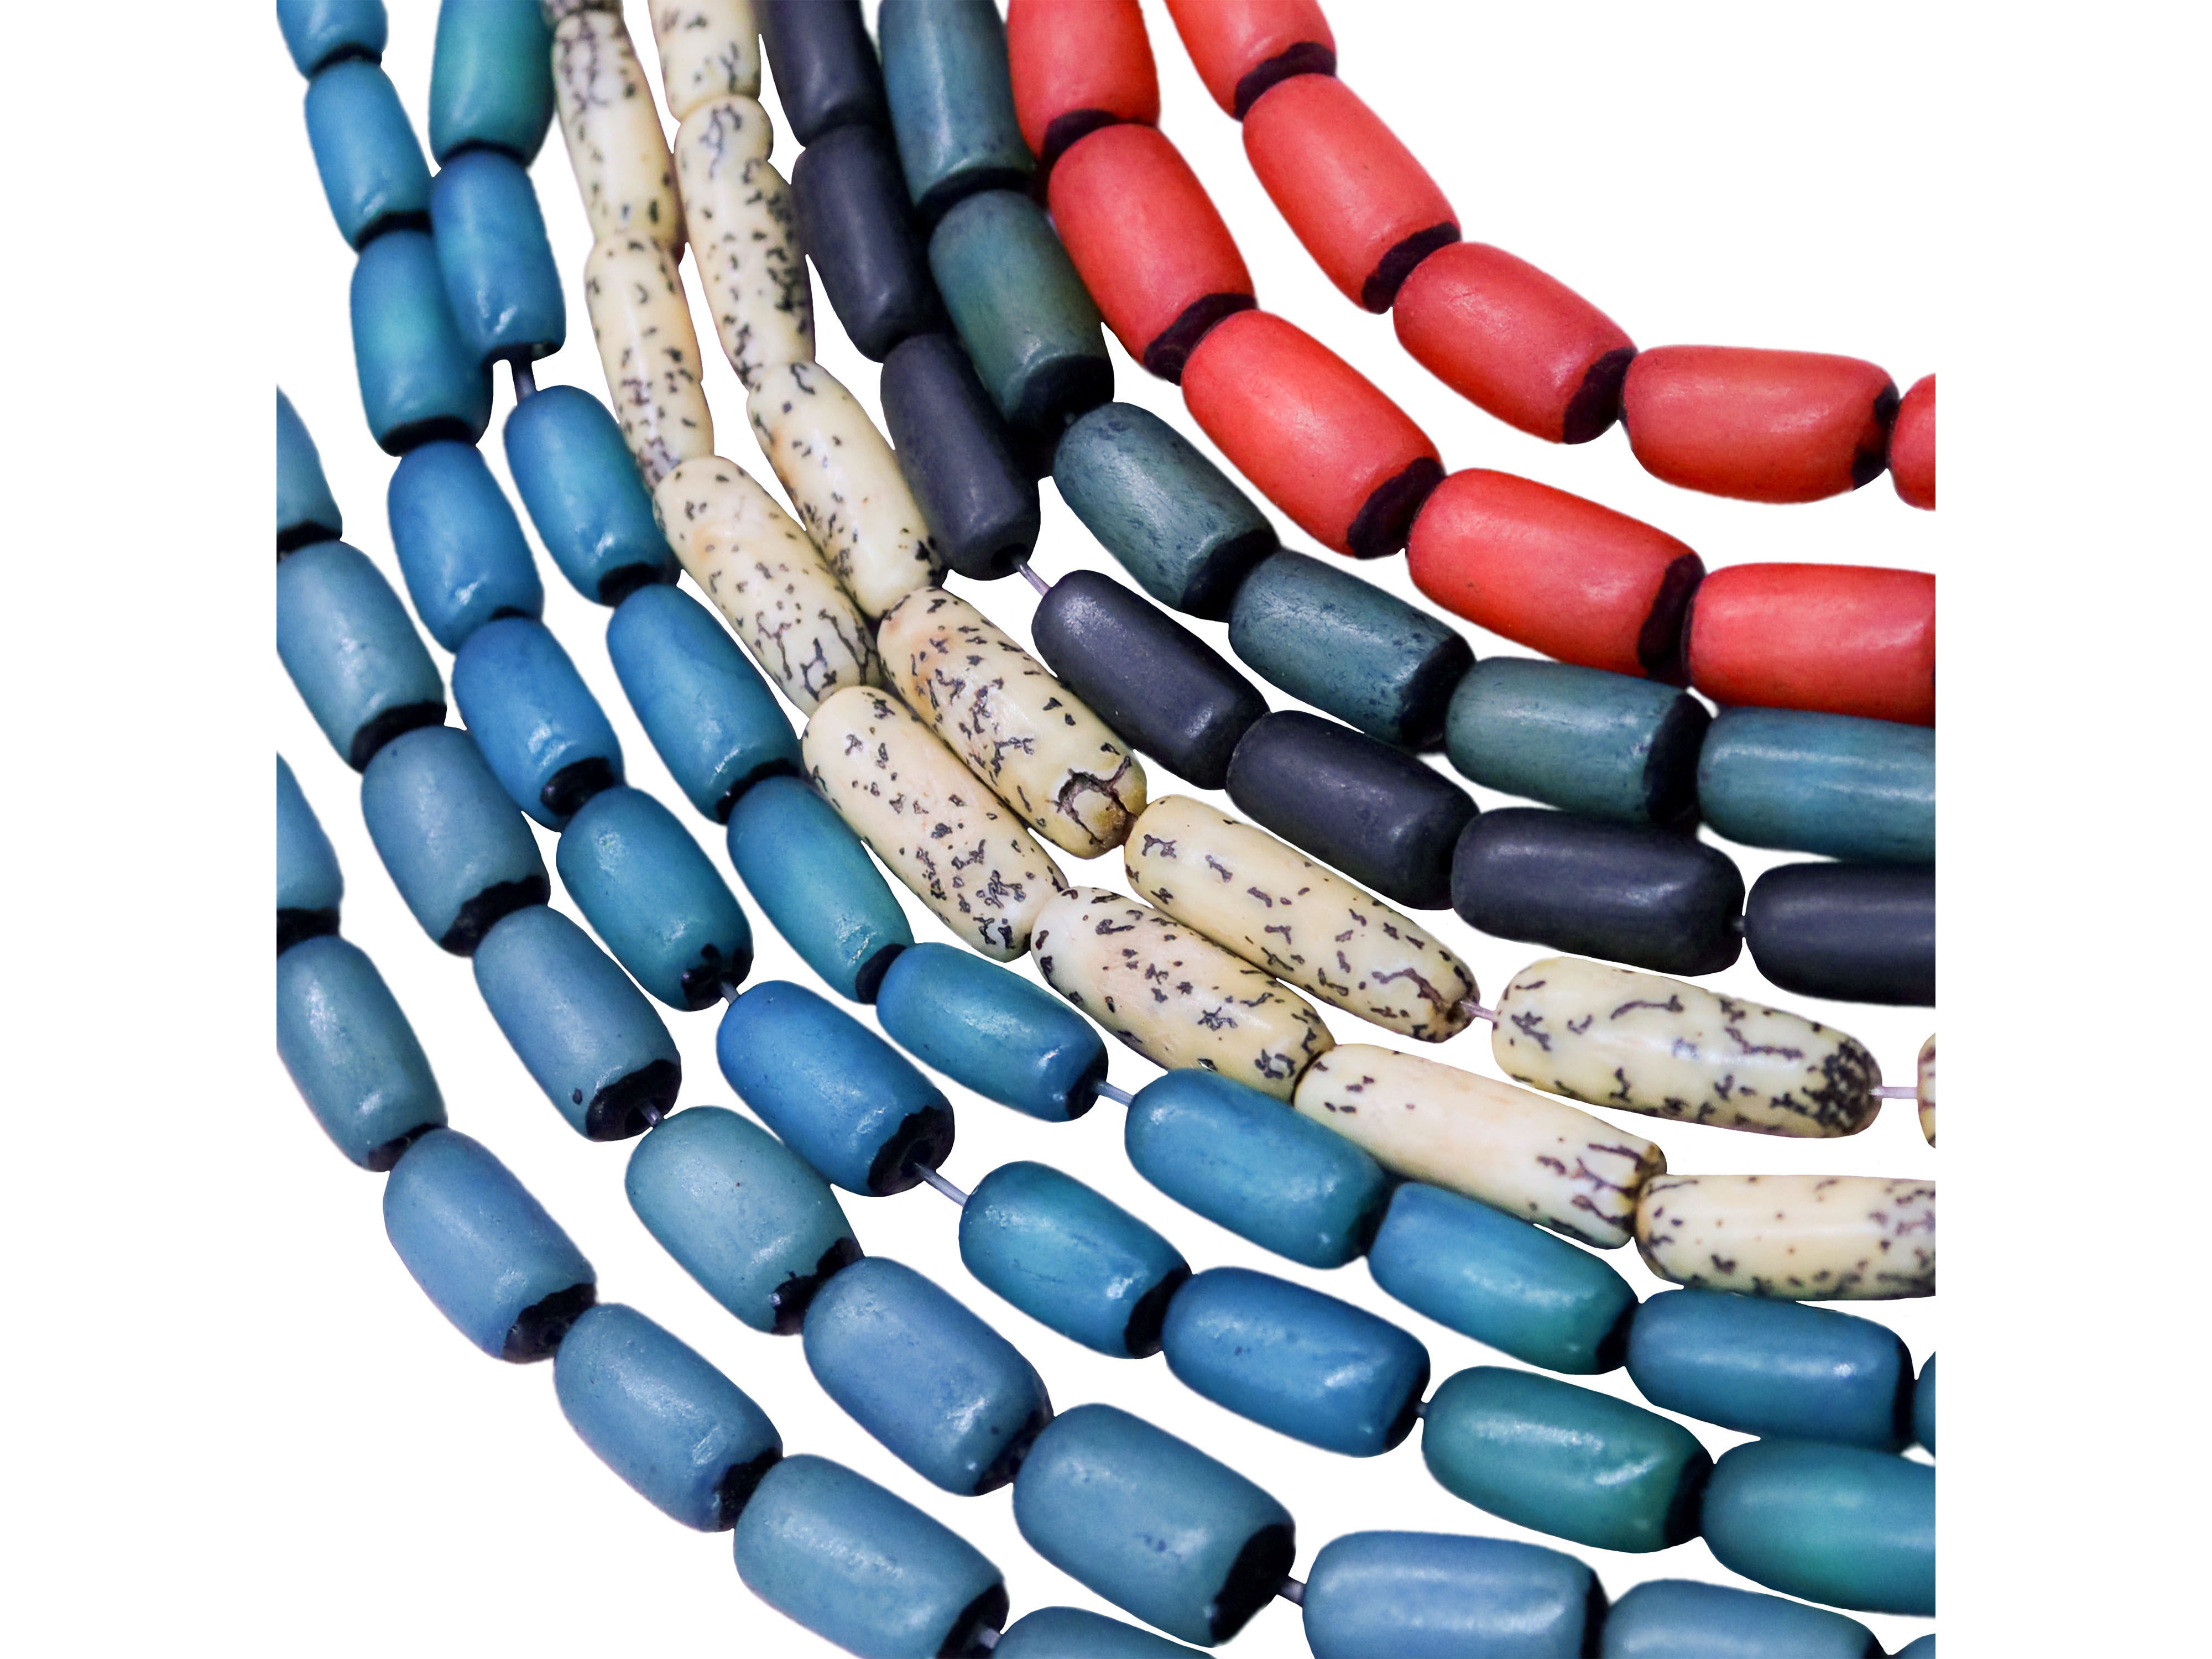 Fun-Weevz 350 African Beads for Jewelry Making, Buri and Betel Nut Bead Strands